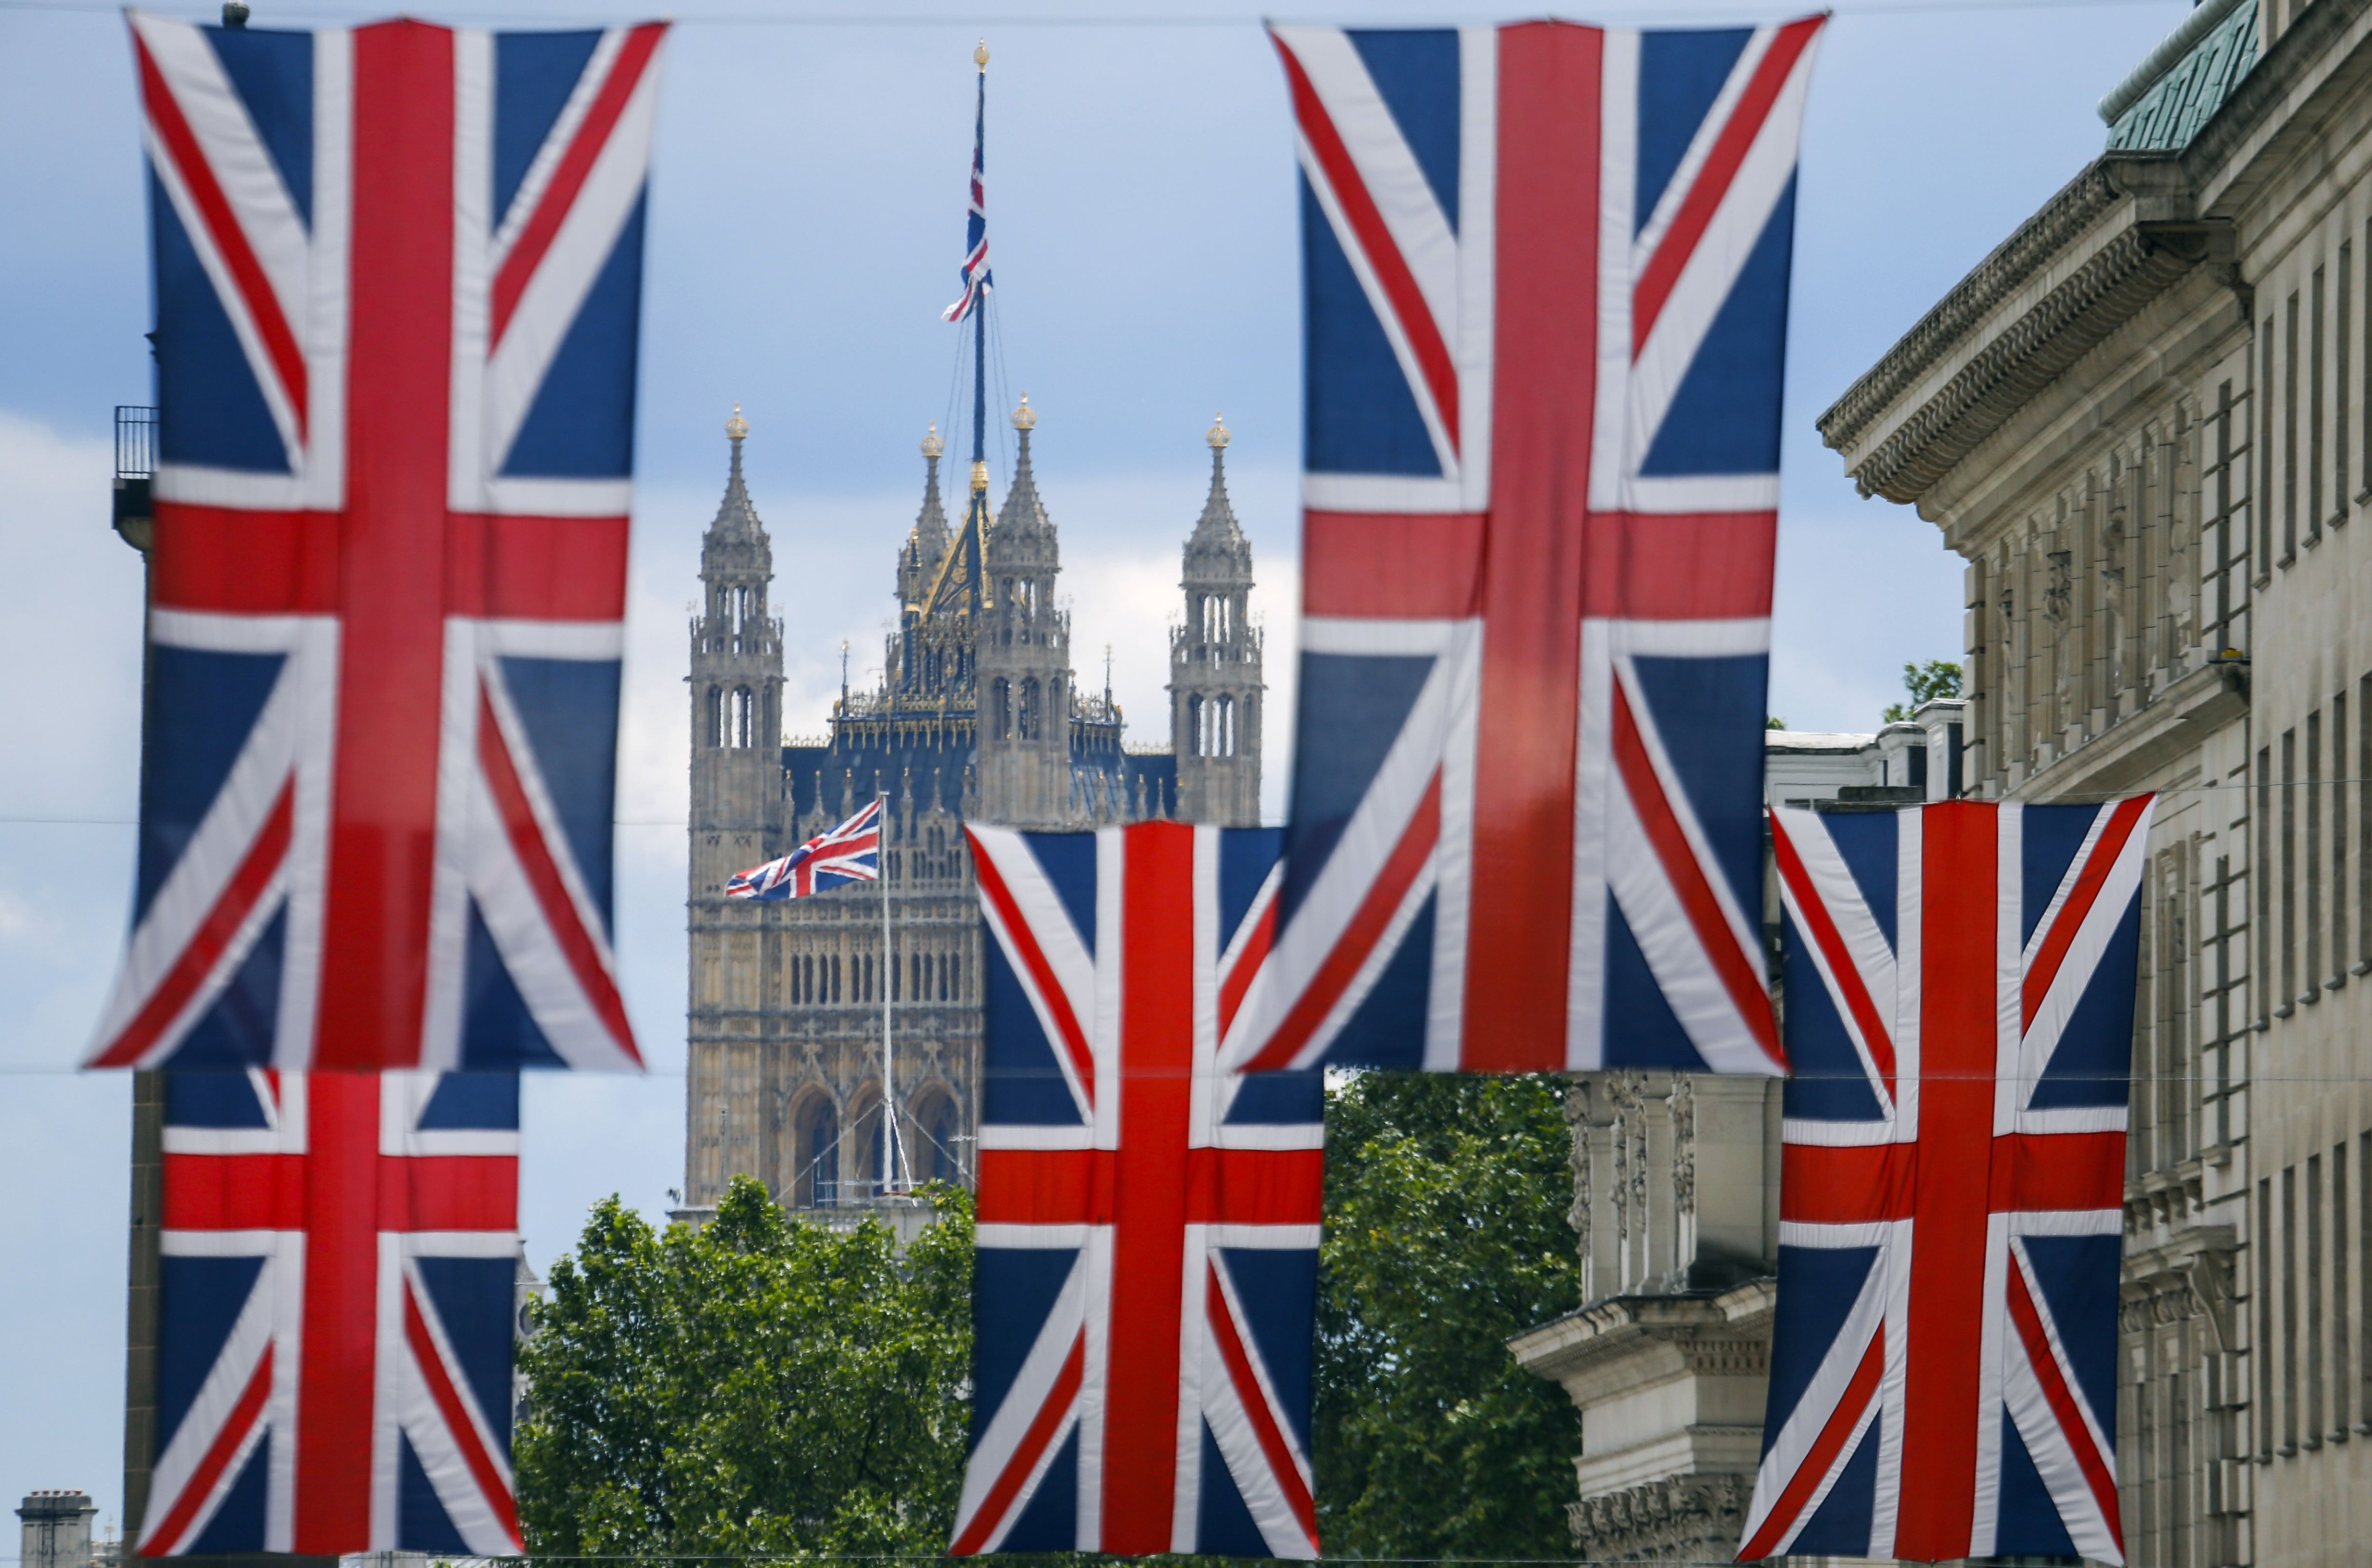 Union flag banners hang across a street near the Houses of Parliament in central London on June 25, 2016 (Odd Andersen—AFP/Getty Images)